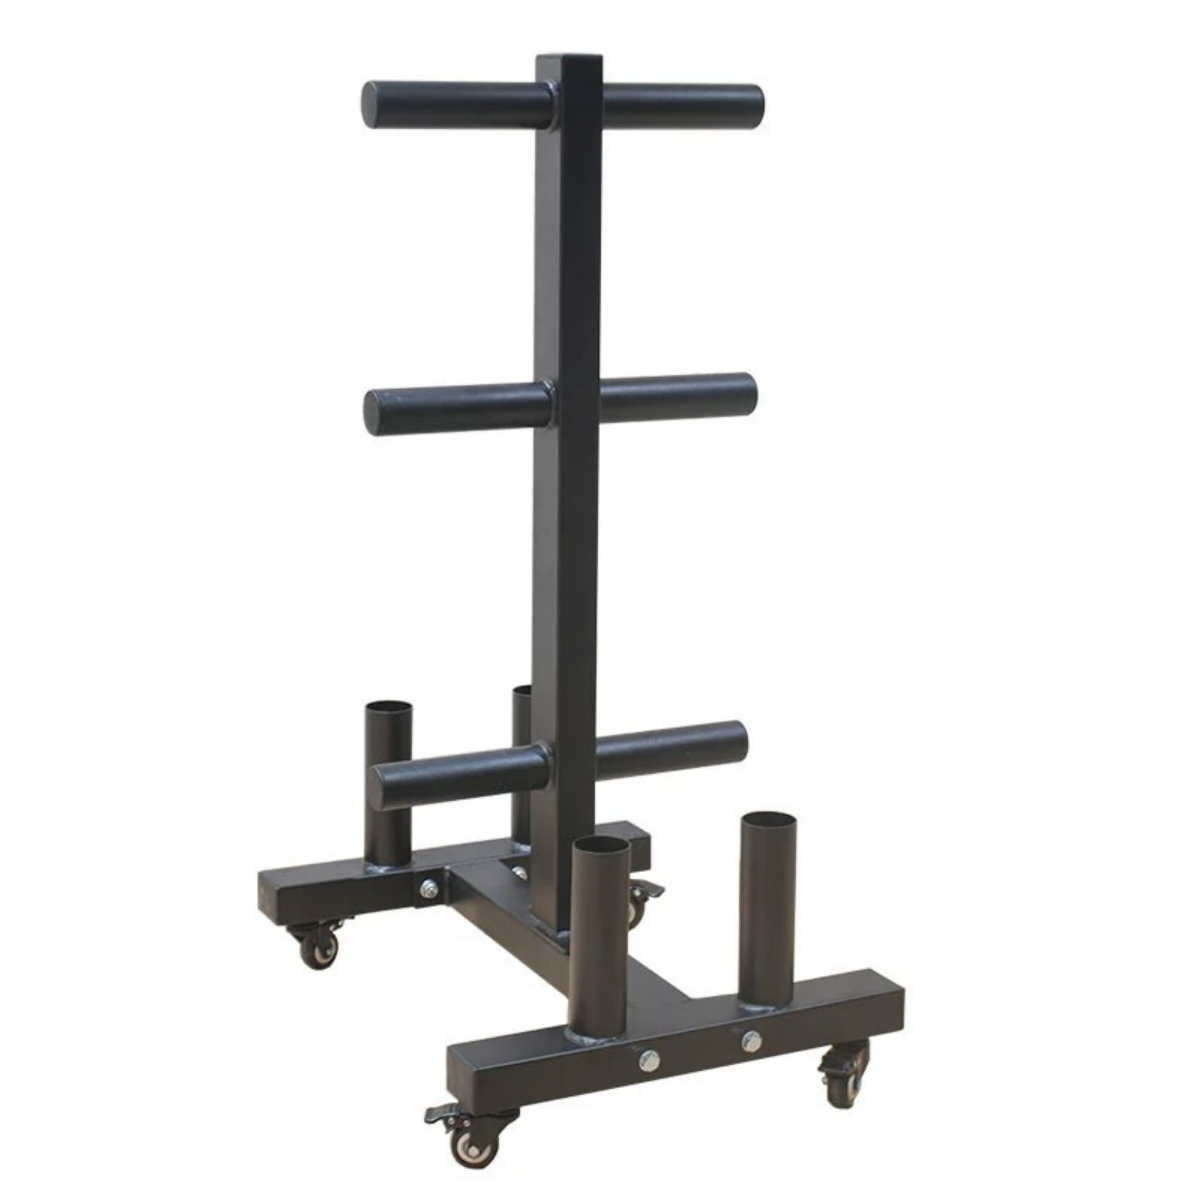 Bumper Weights Tree with Barbell Holders